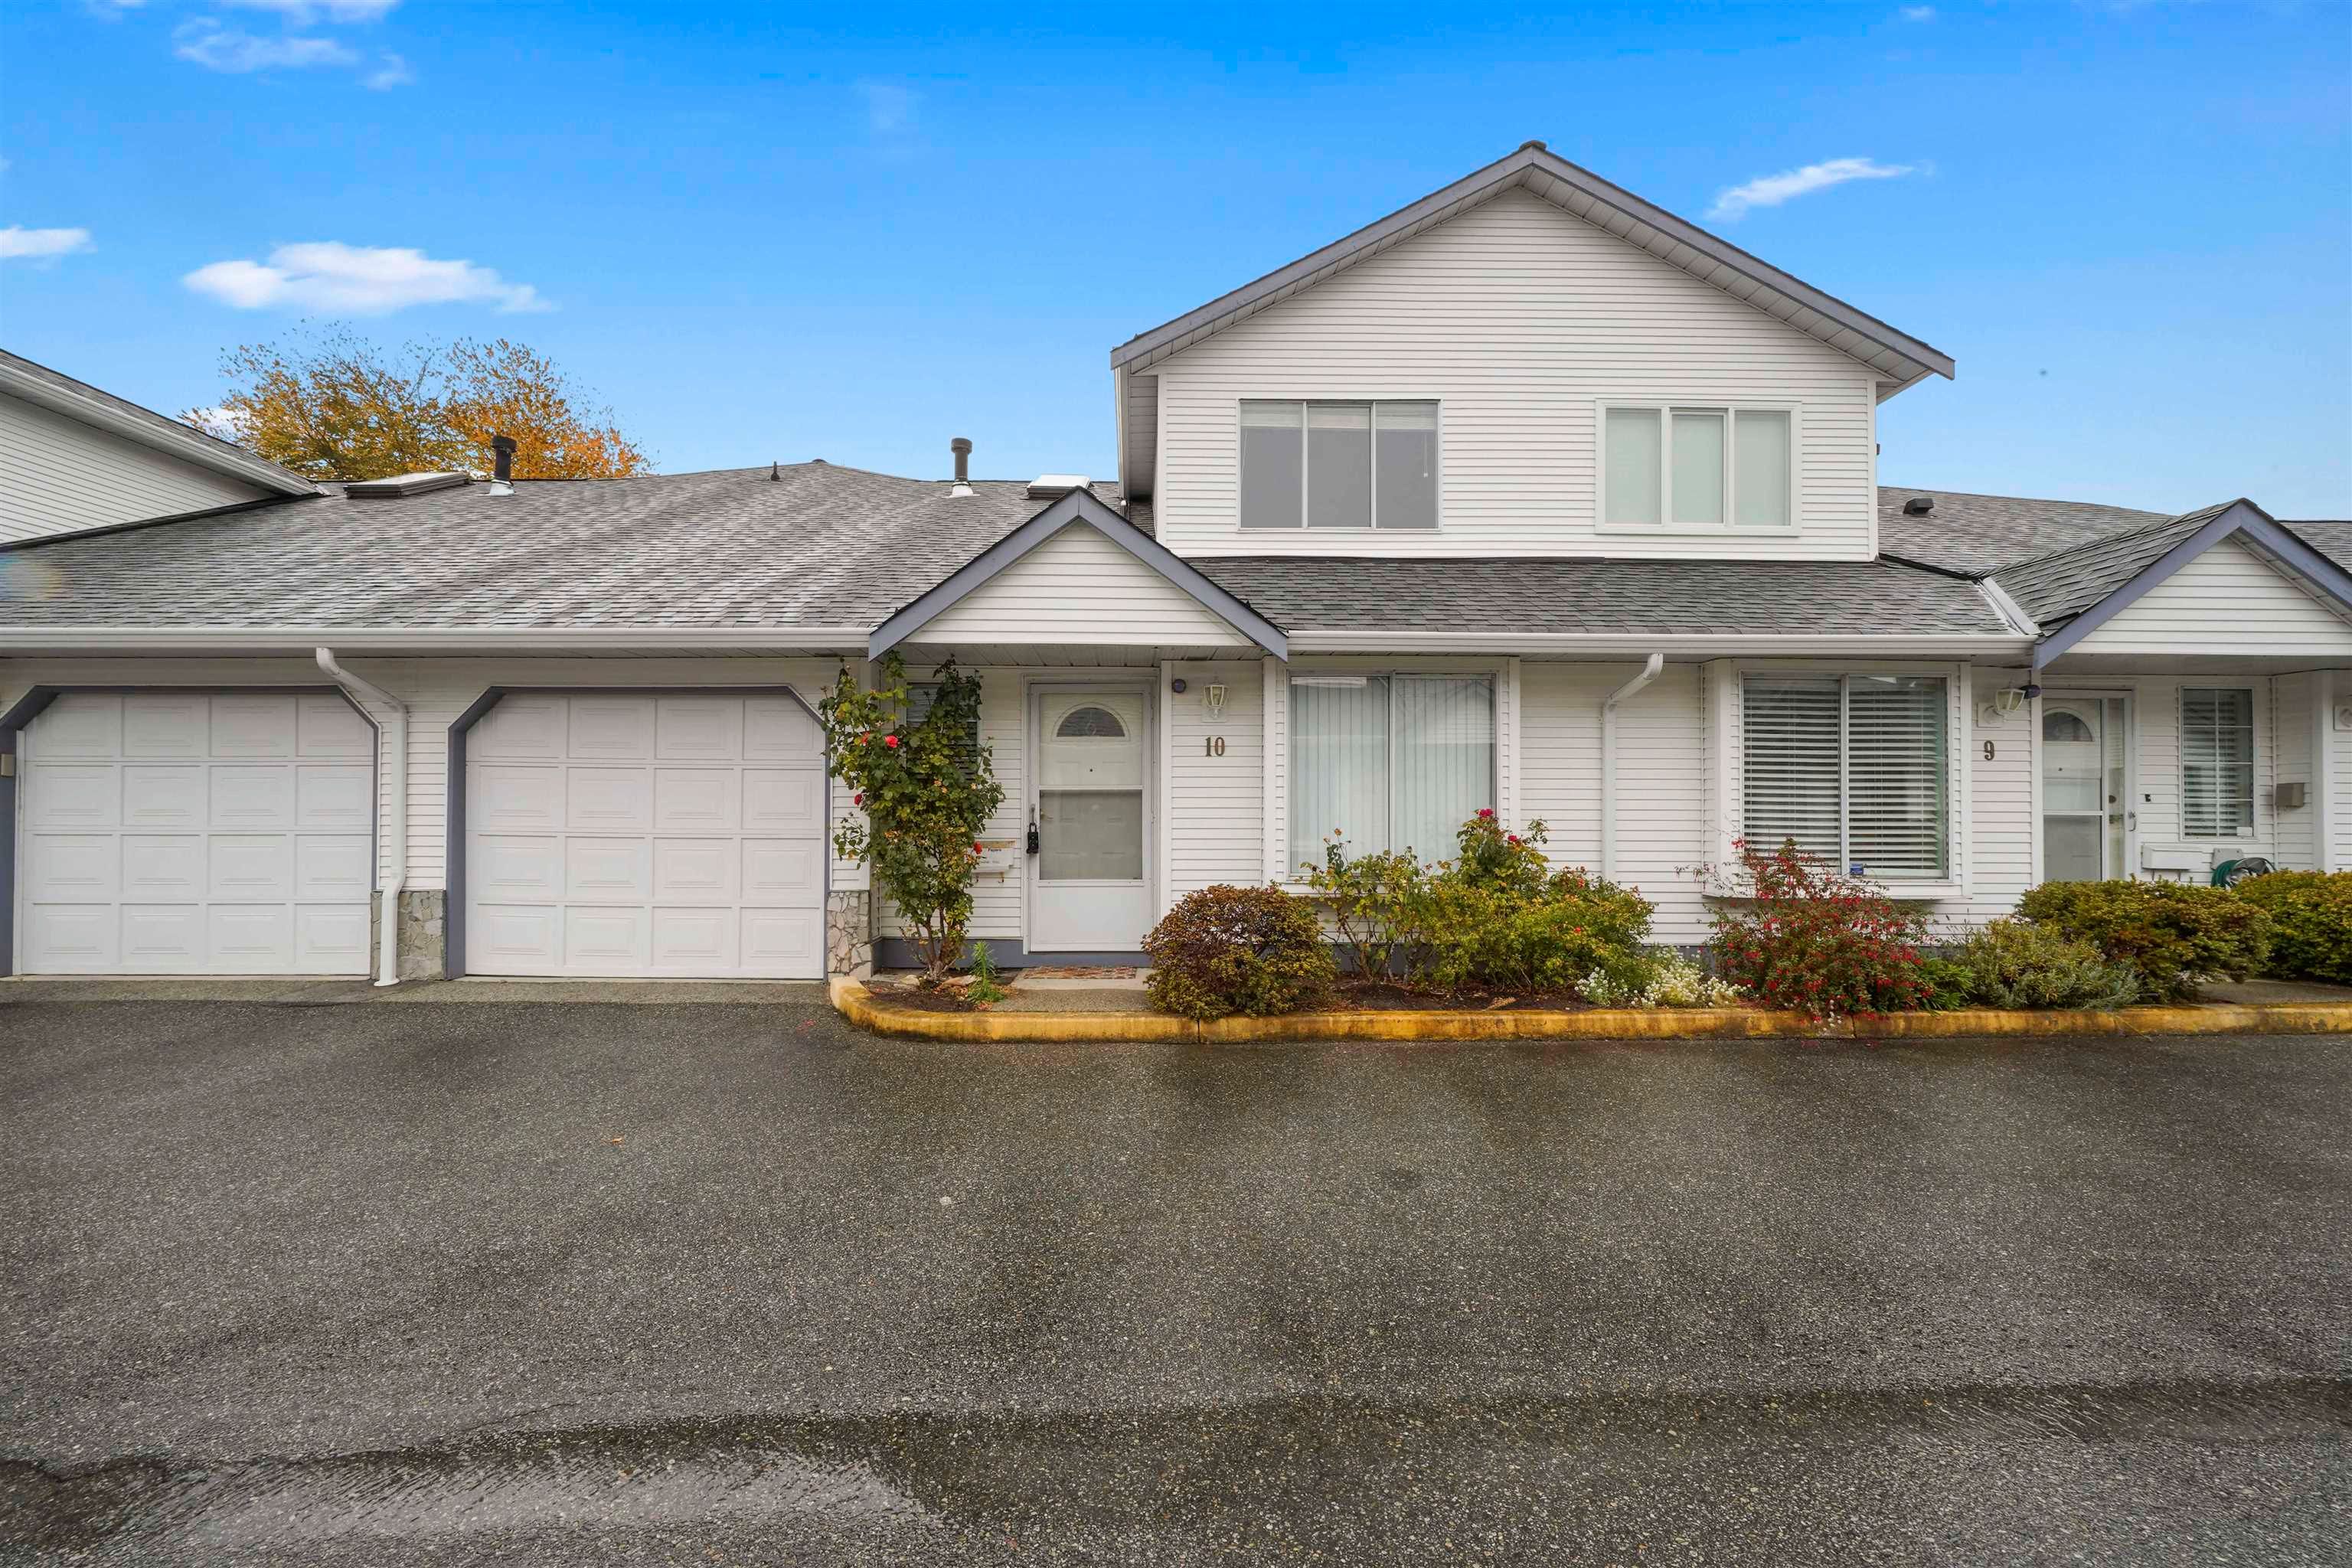 New property listed in Central Meadows, Pitt Meadows